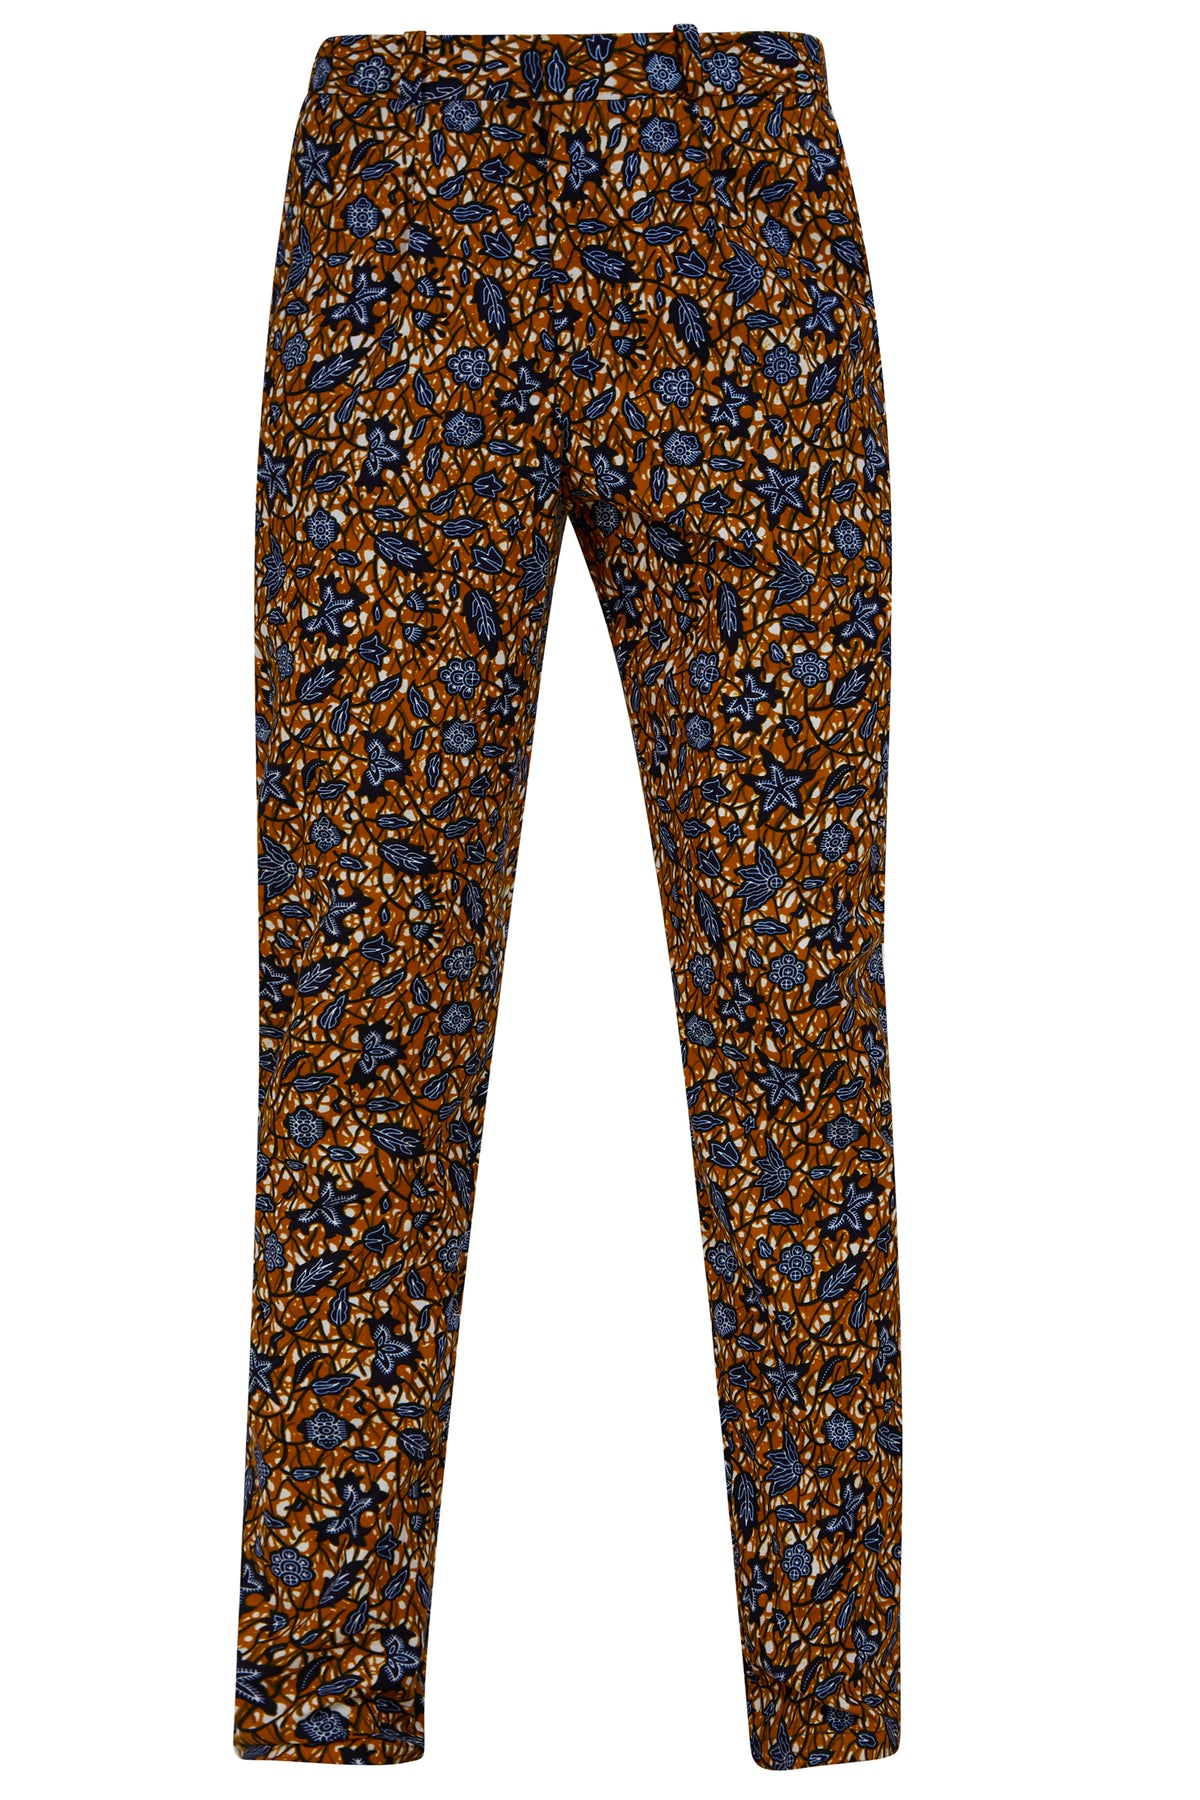 Osei straight leg trousers-Brown Floral - OHEMA OHENE AFRICAN INSPIRED FASHION